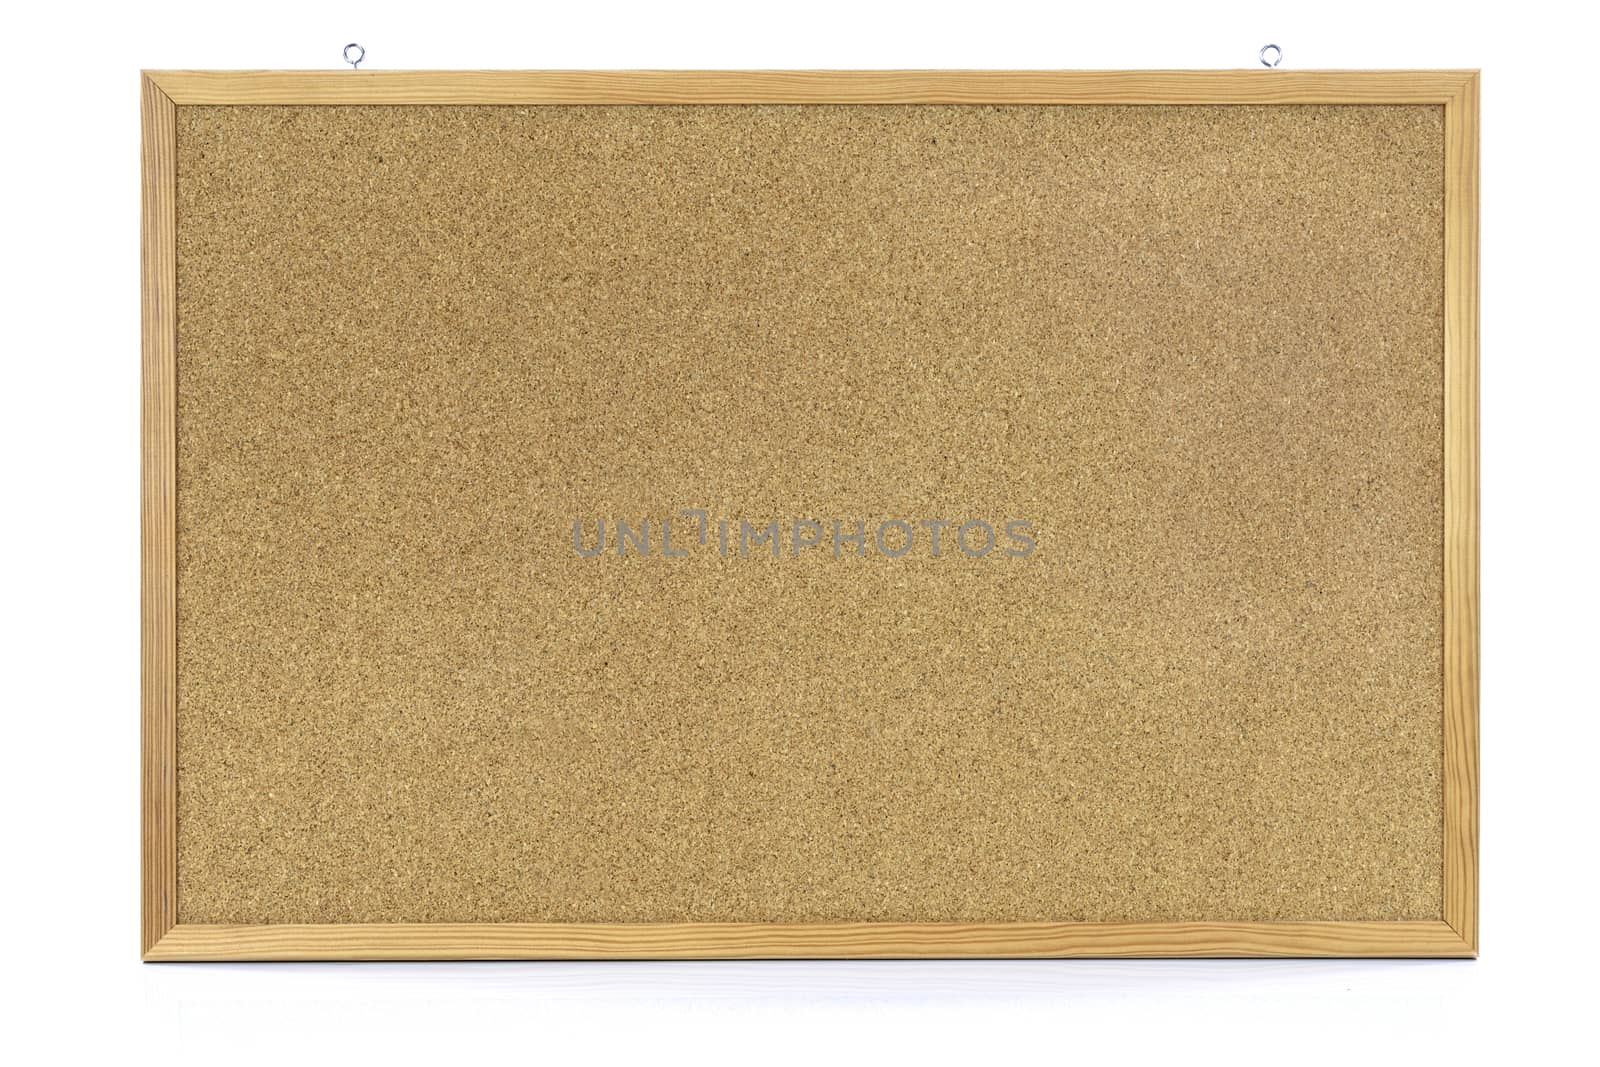 Cork notice board with wooden frame isolated on white background